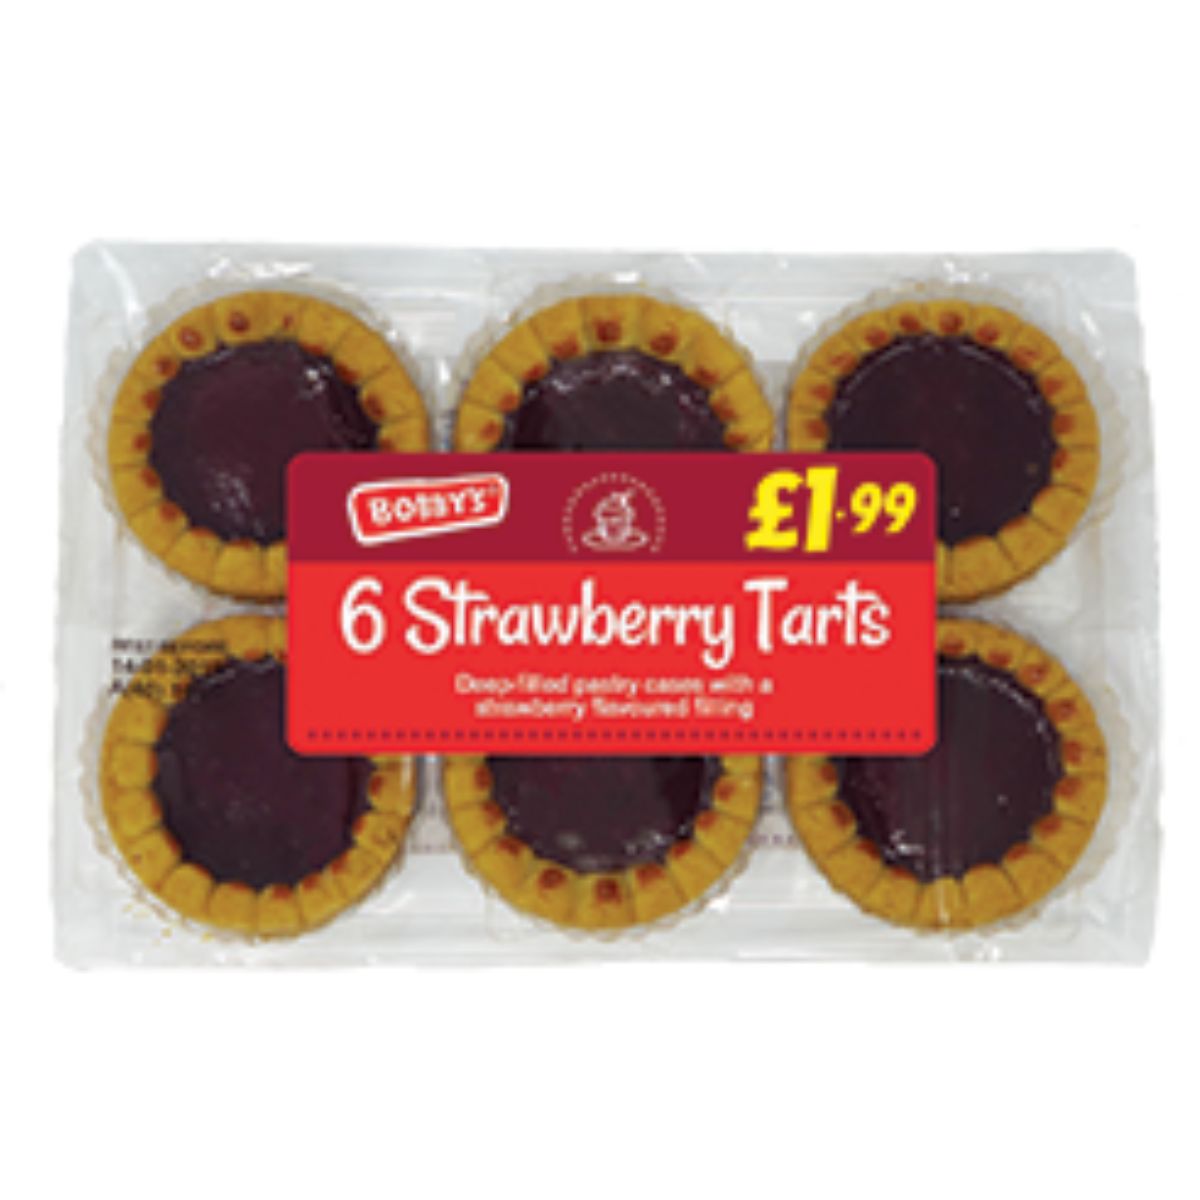 Bobbys - Strawberry Tarts - 6pcs with a deep-filled custard center and strawberry-flavored sauce, priced at £1.99.